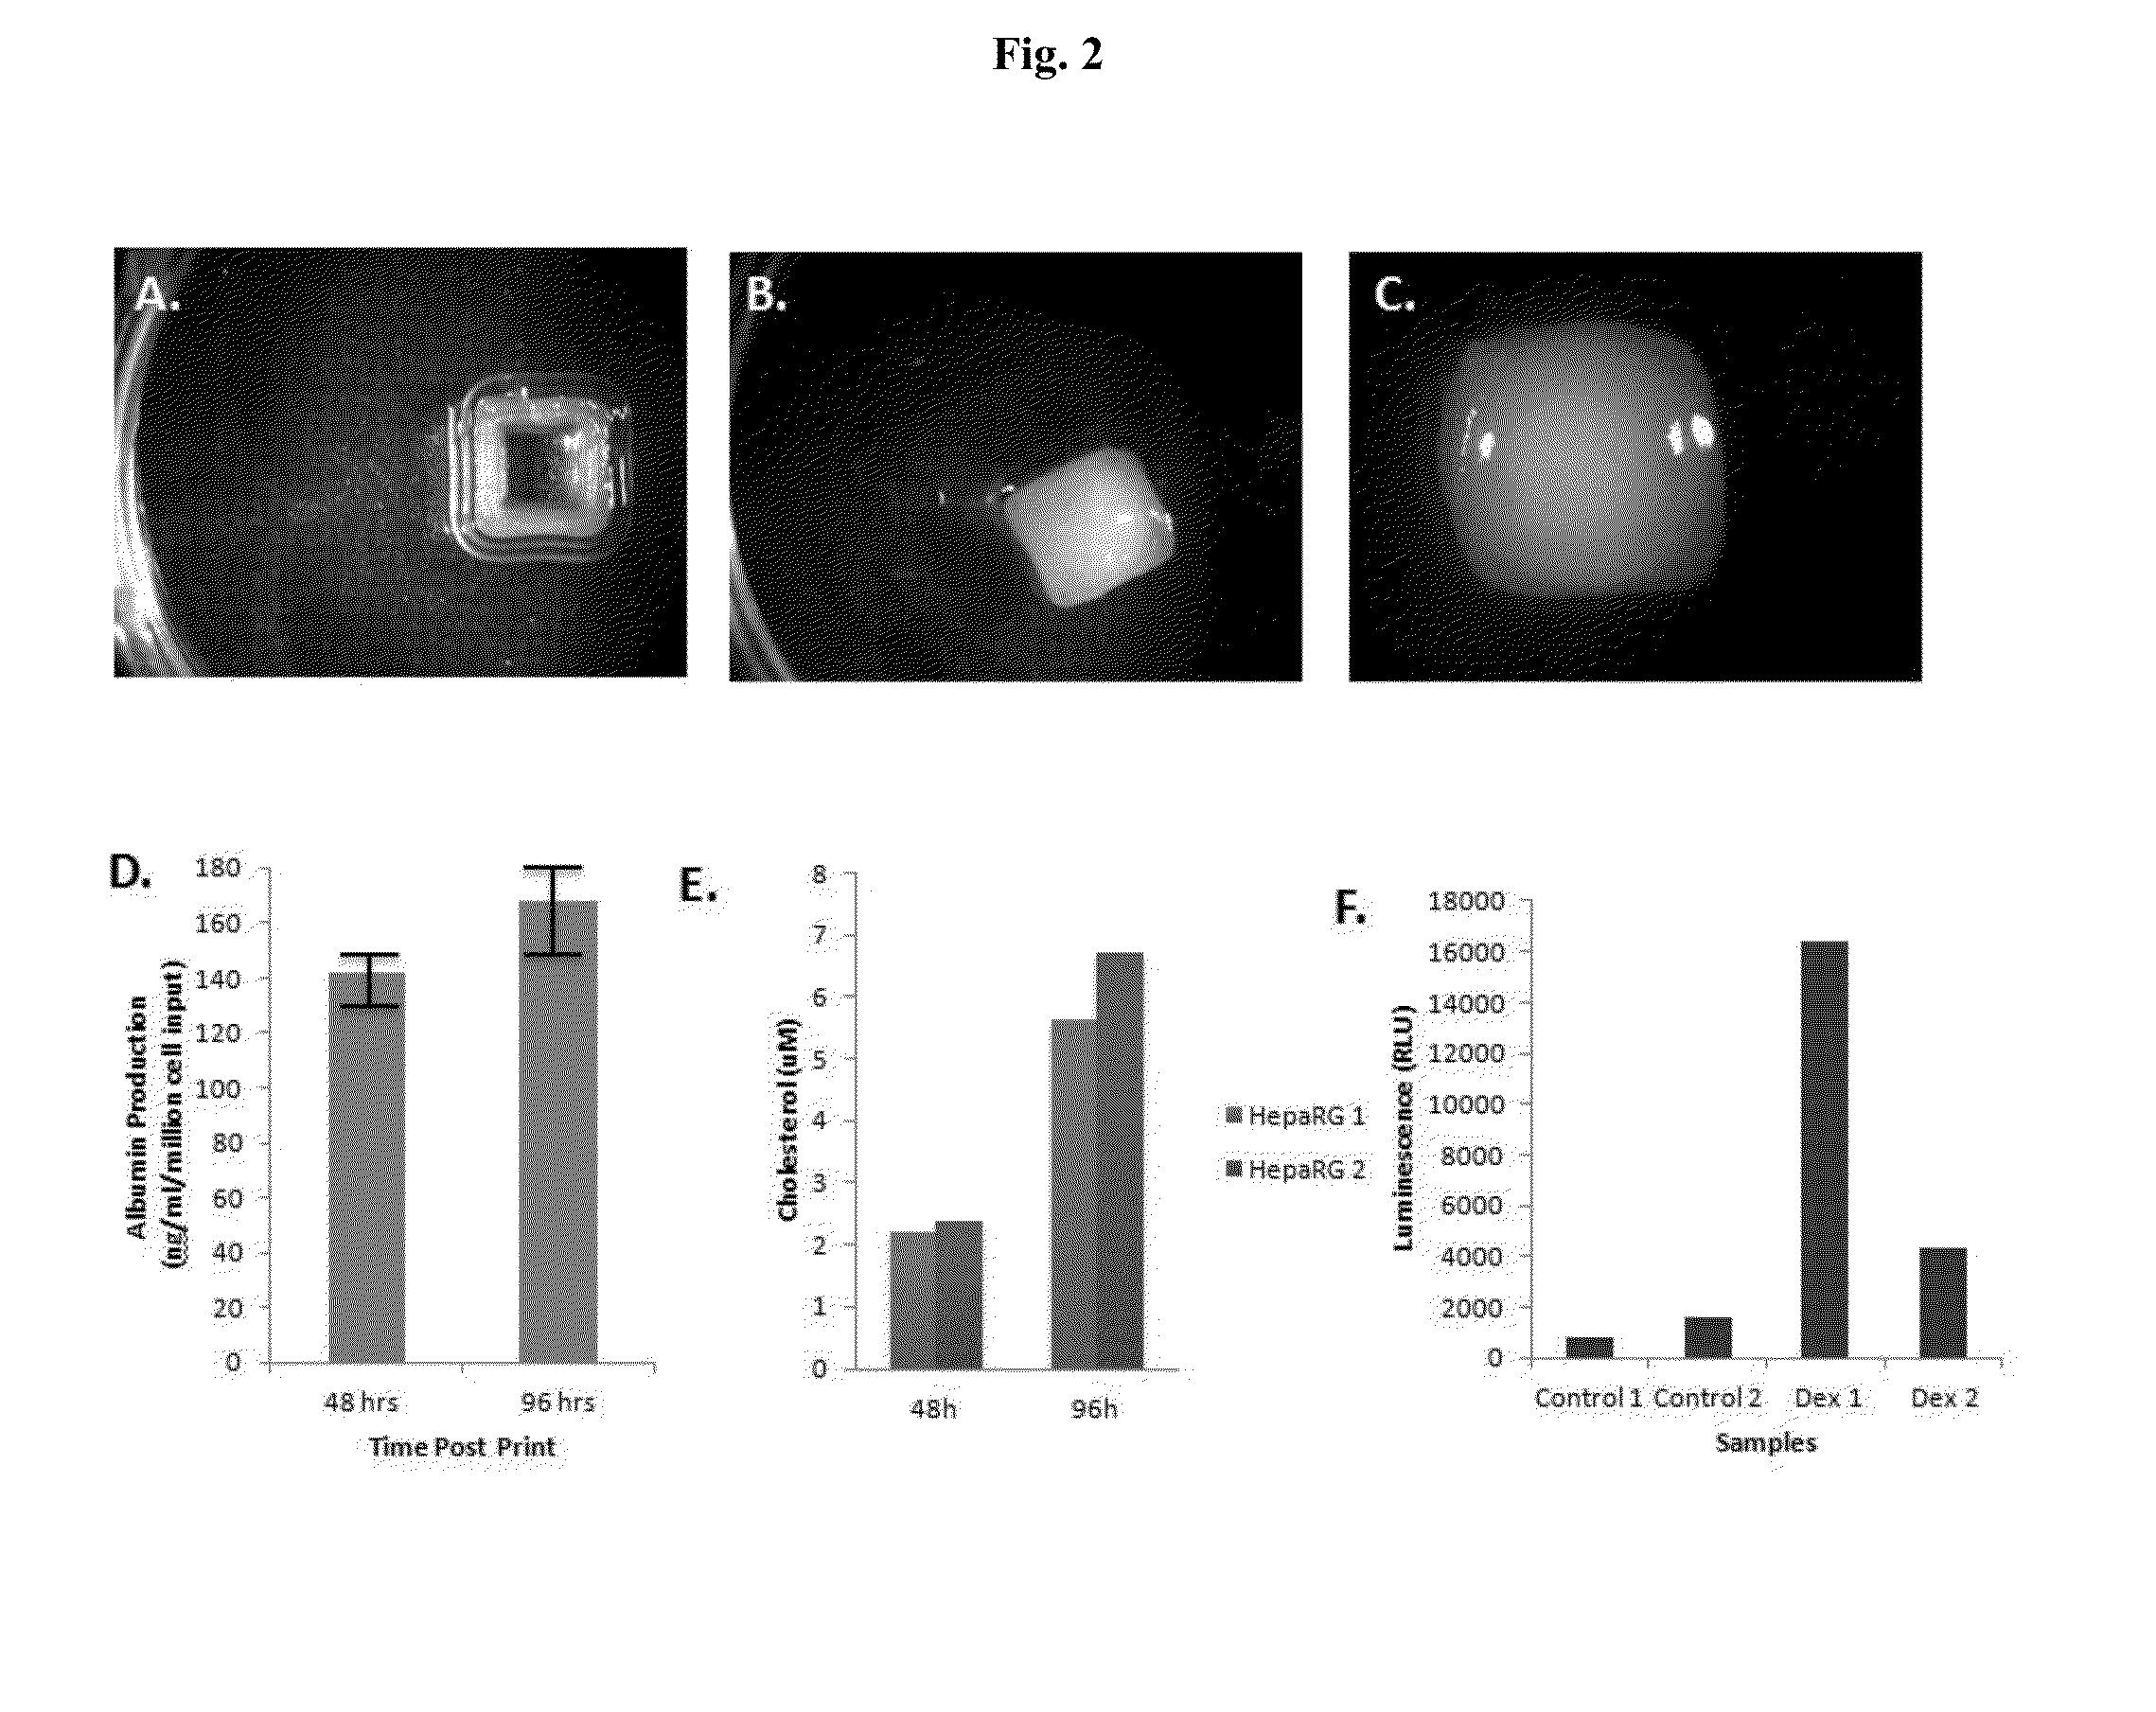 Engineered liver tissues, arrays thereof, and methods of making the same